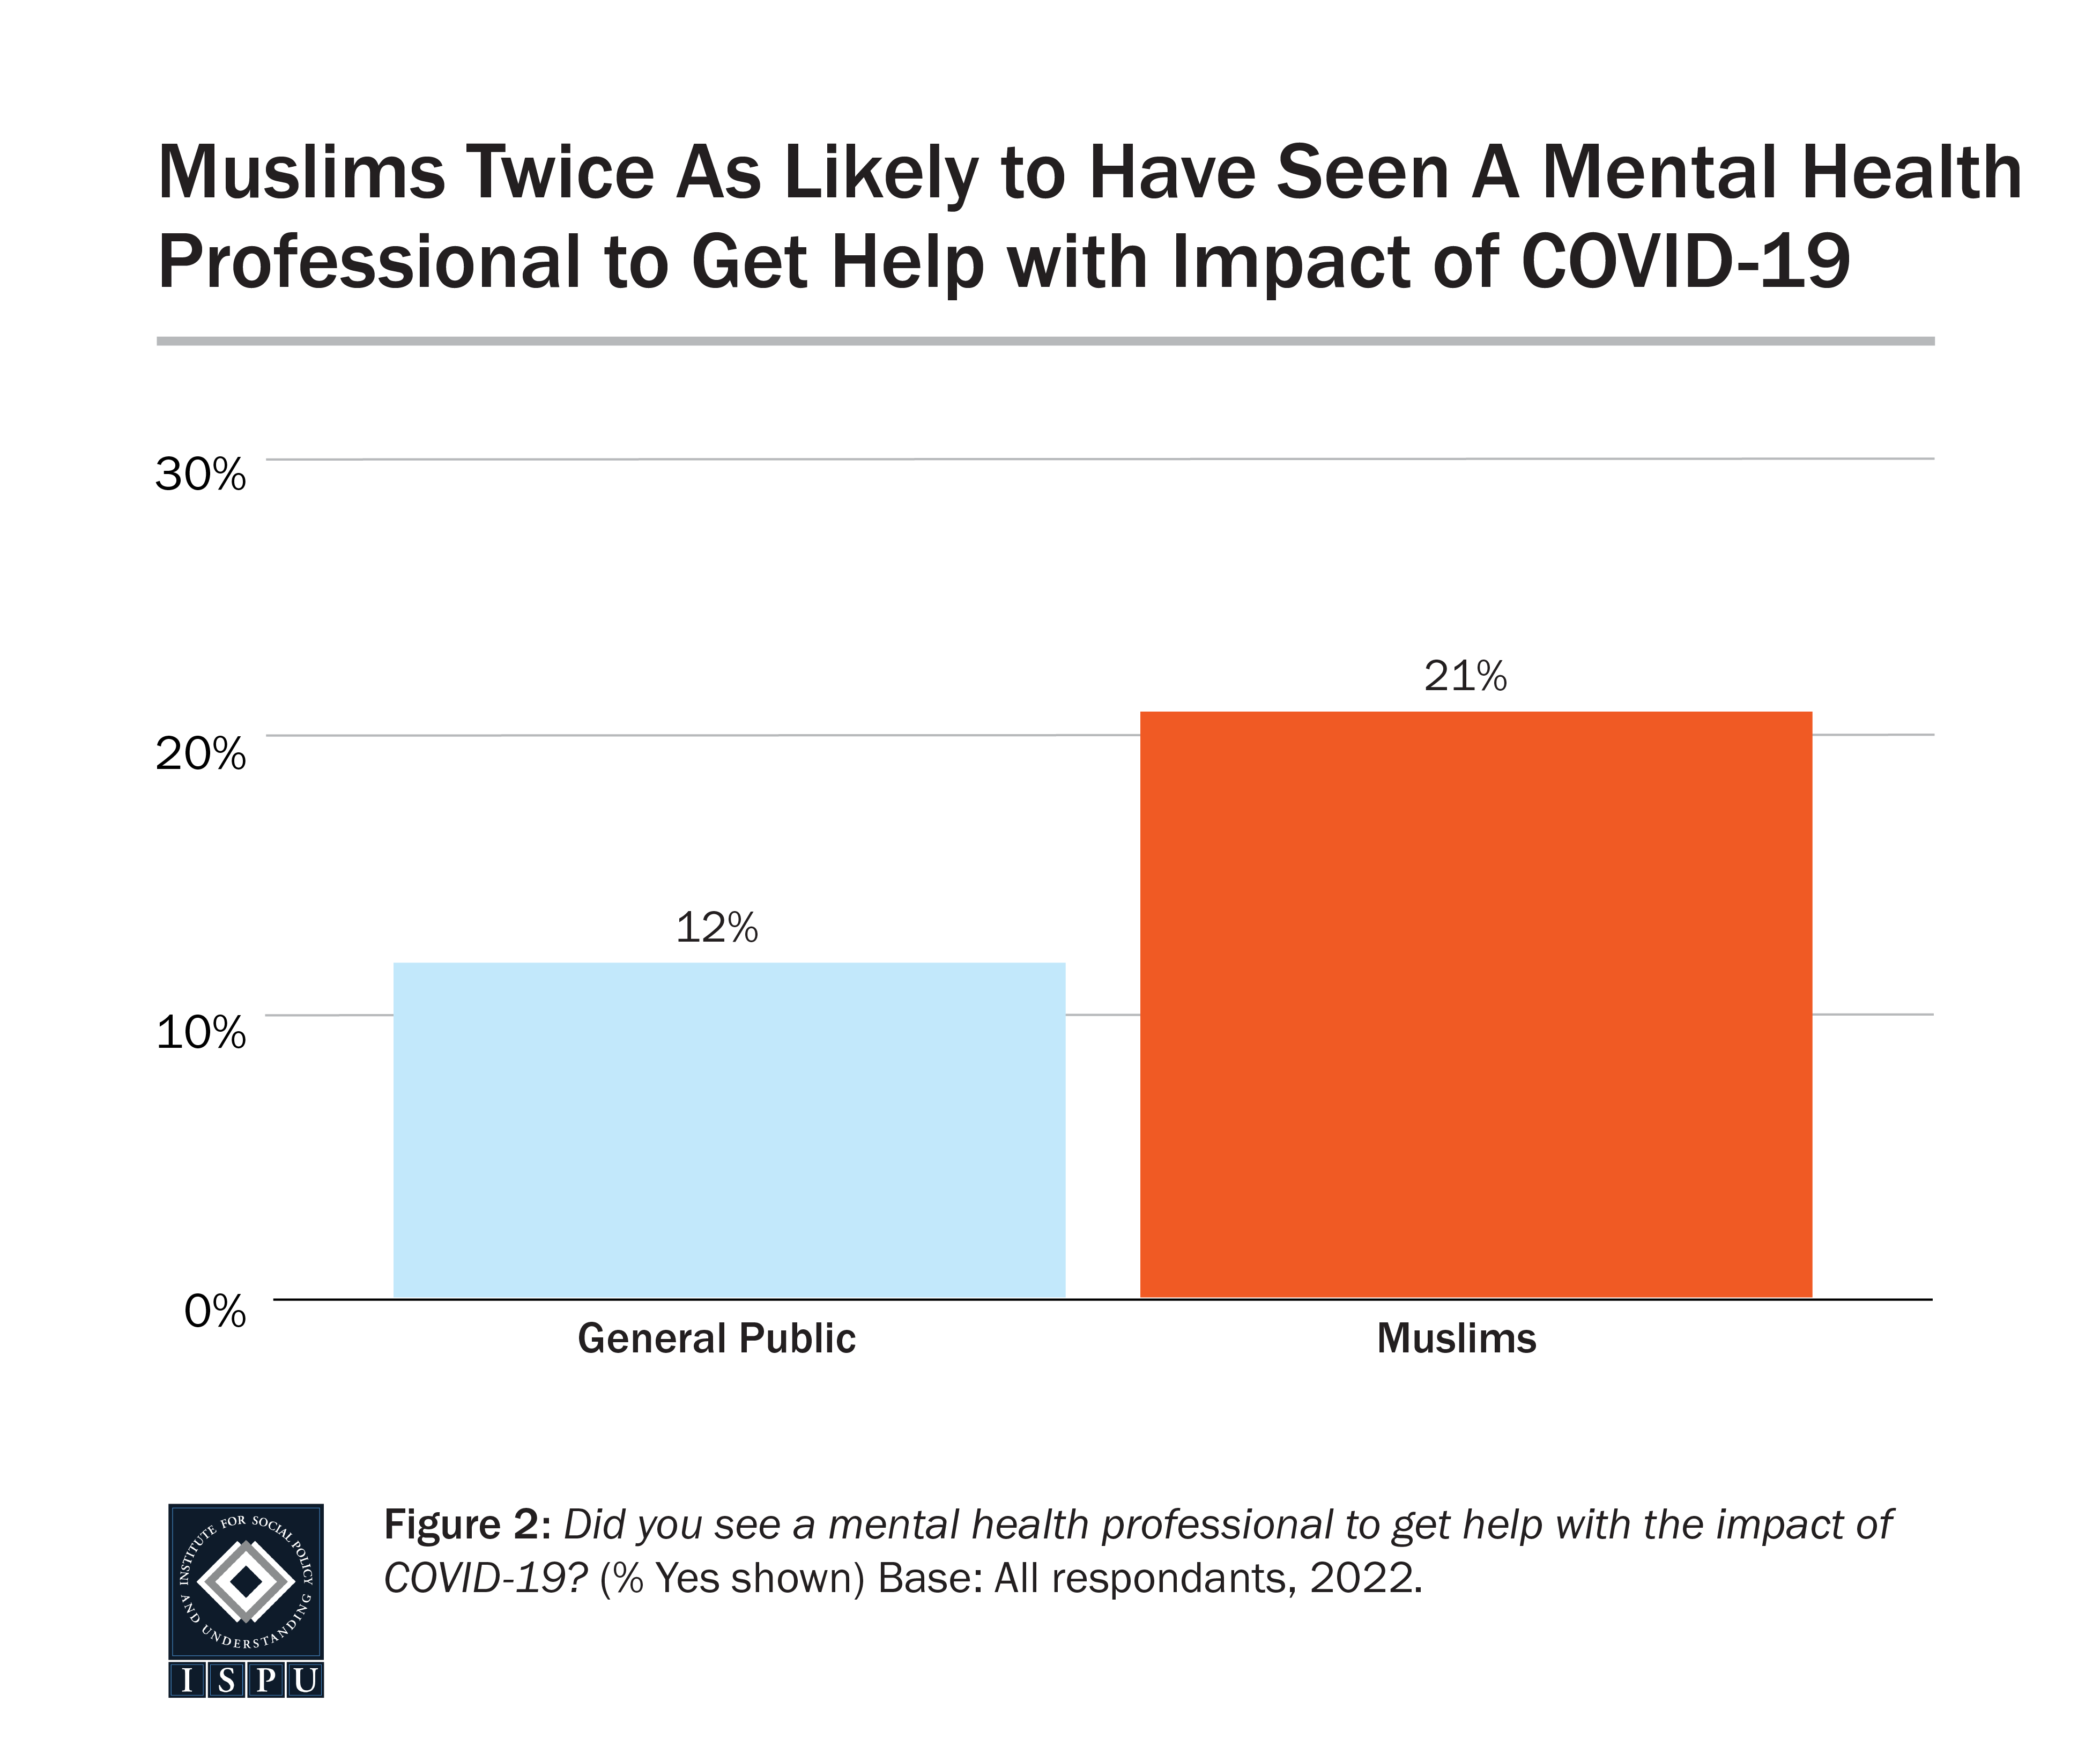 Graph displaying: bar chart showing American Muslims twice as likely as general public to seek mental health support to cope with COVID-19.